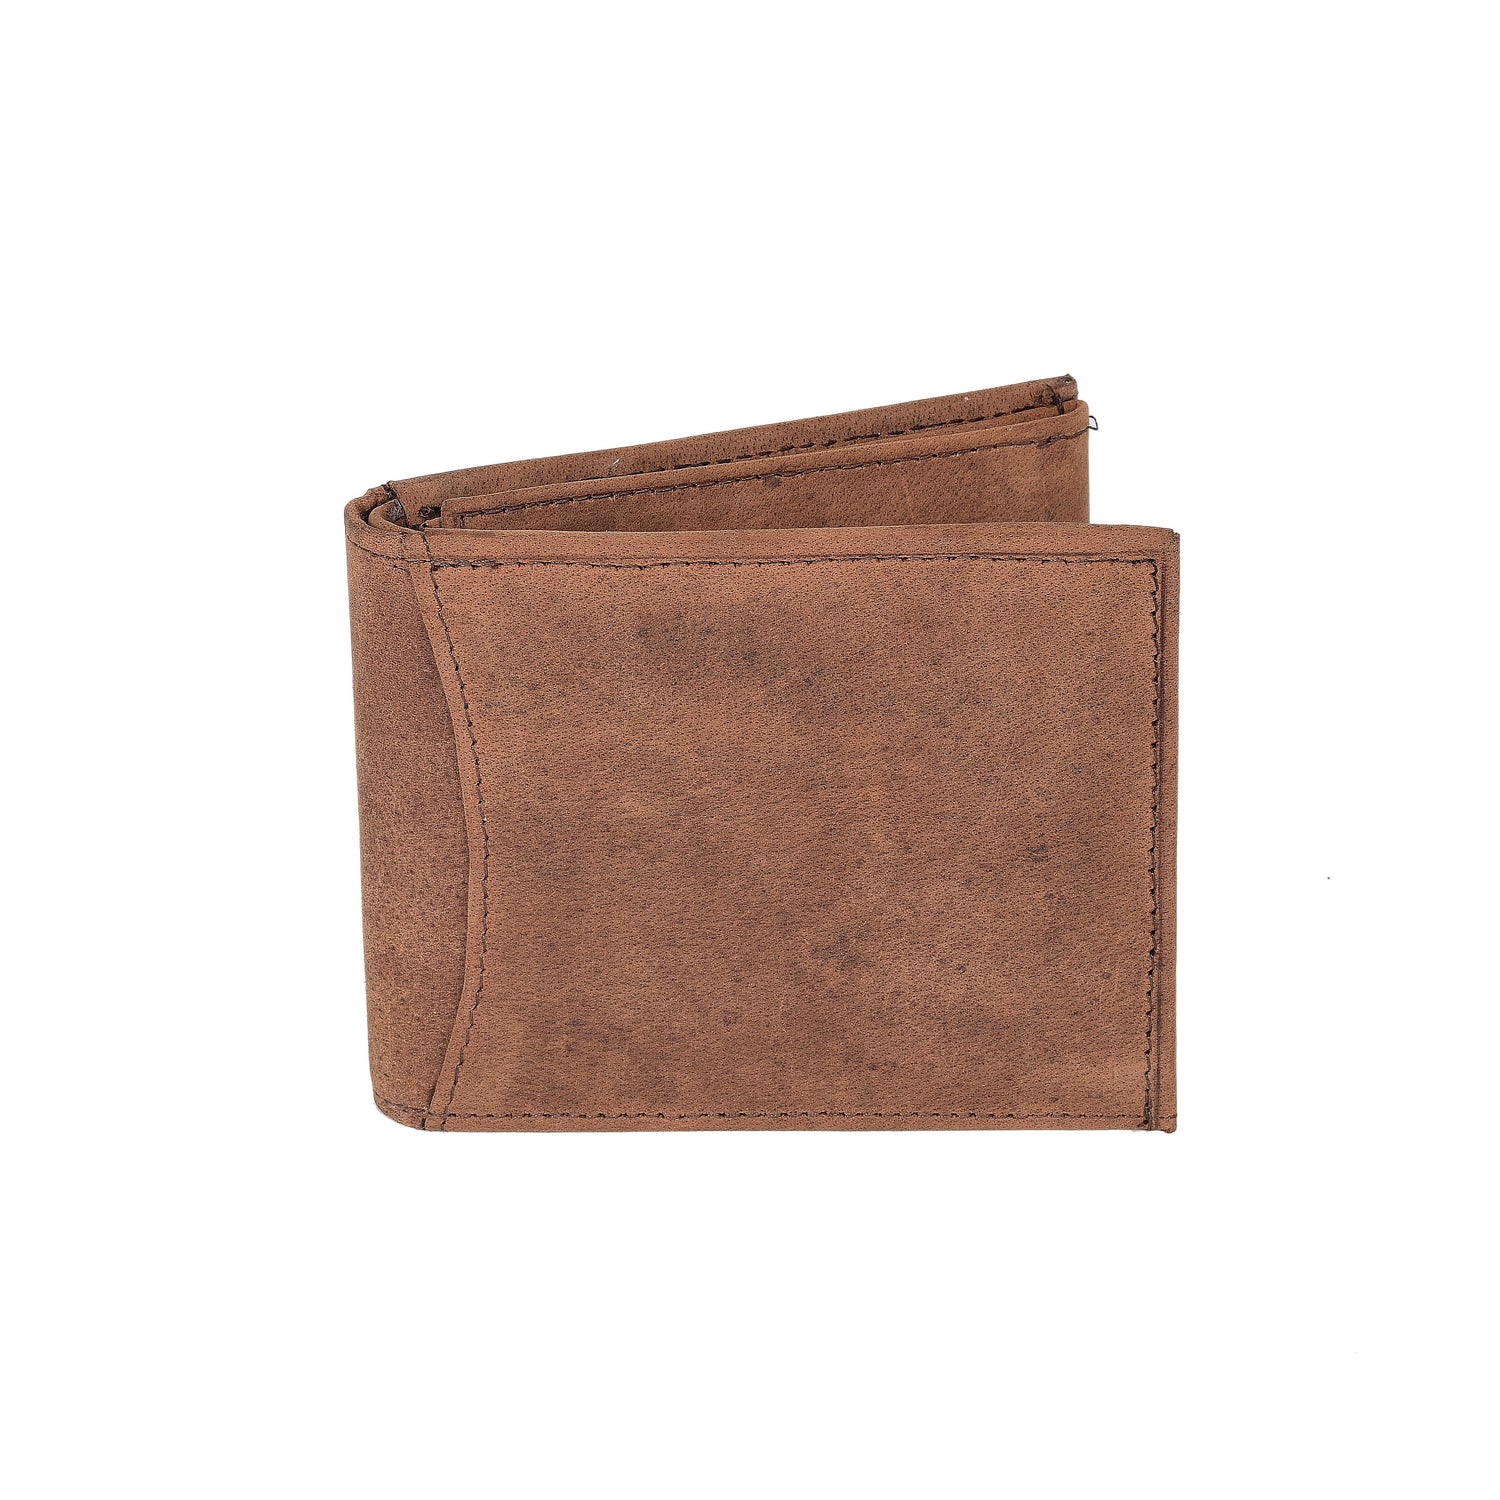 Buy Online FIONA Mens Leather Bifold Wallet | Wallets For Men RFID Blocking  | Genuine Leather | Extra Ca - Zifiti.com 1044621